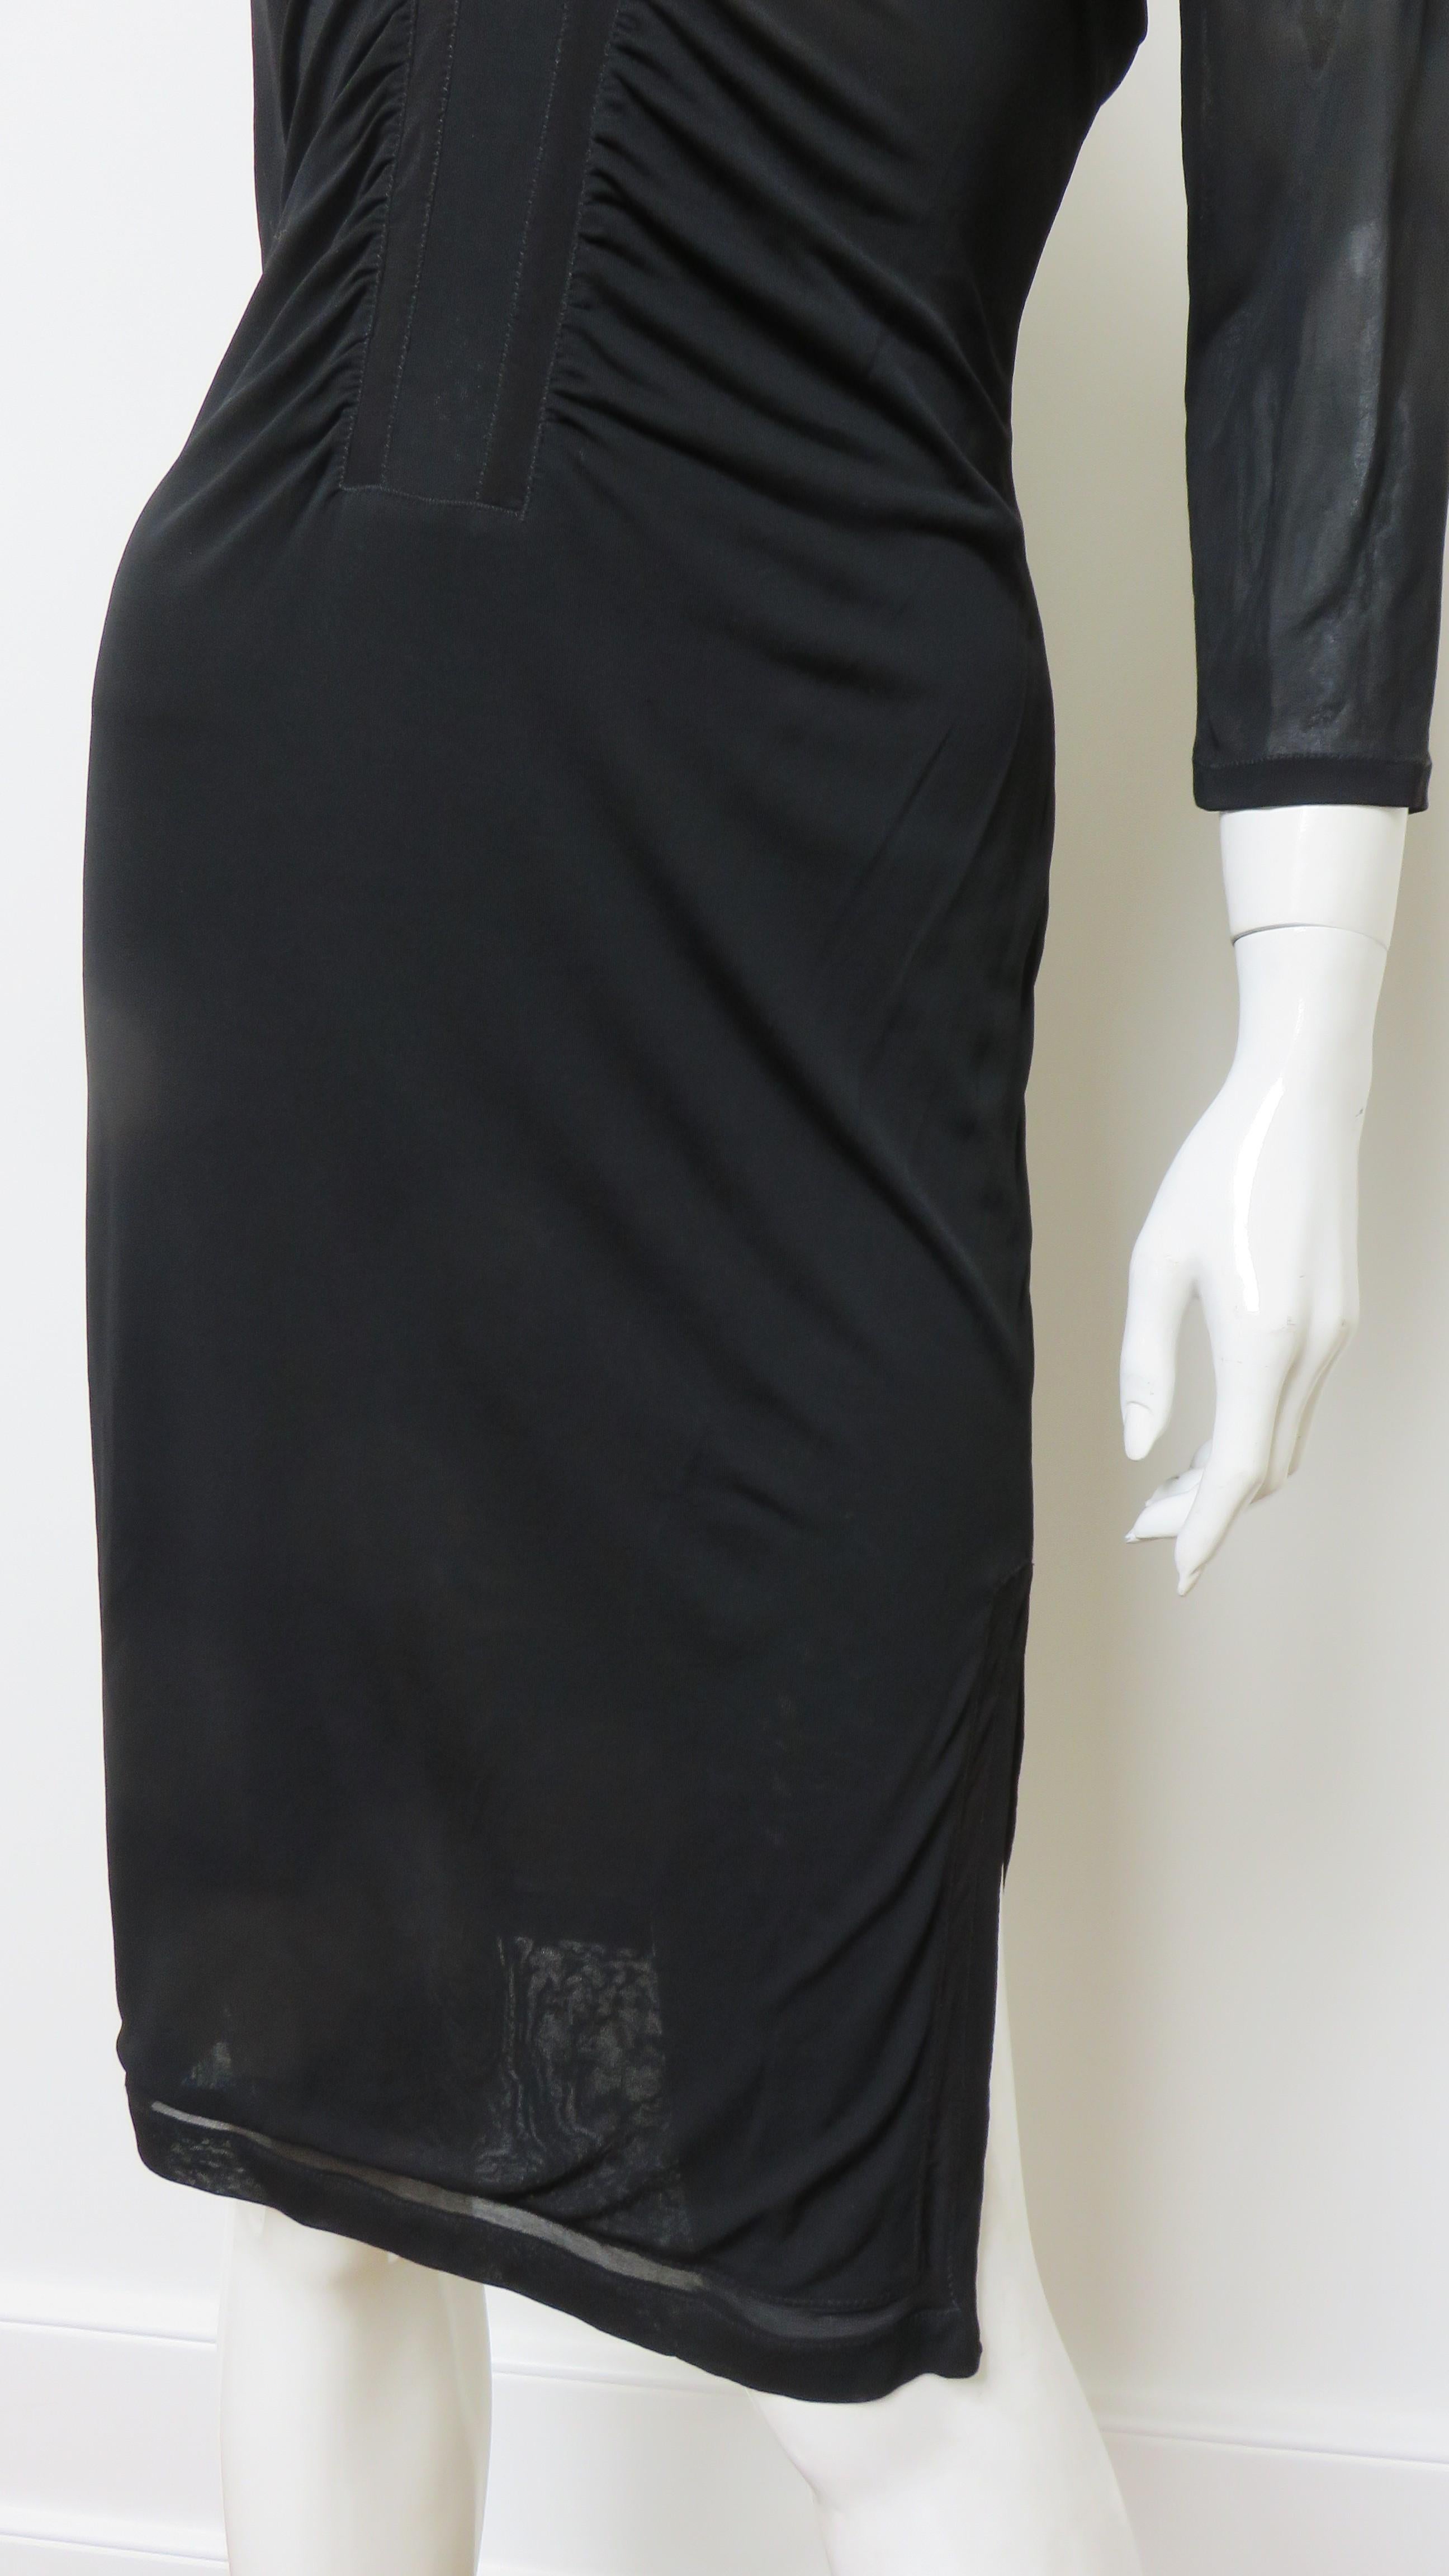 Tom Ford For Gucci Dress with Cut outs In Good Condition For Sale In Water Mill, NY